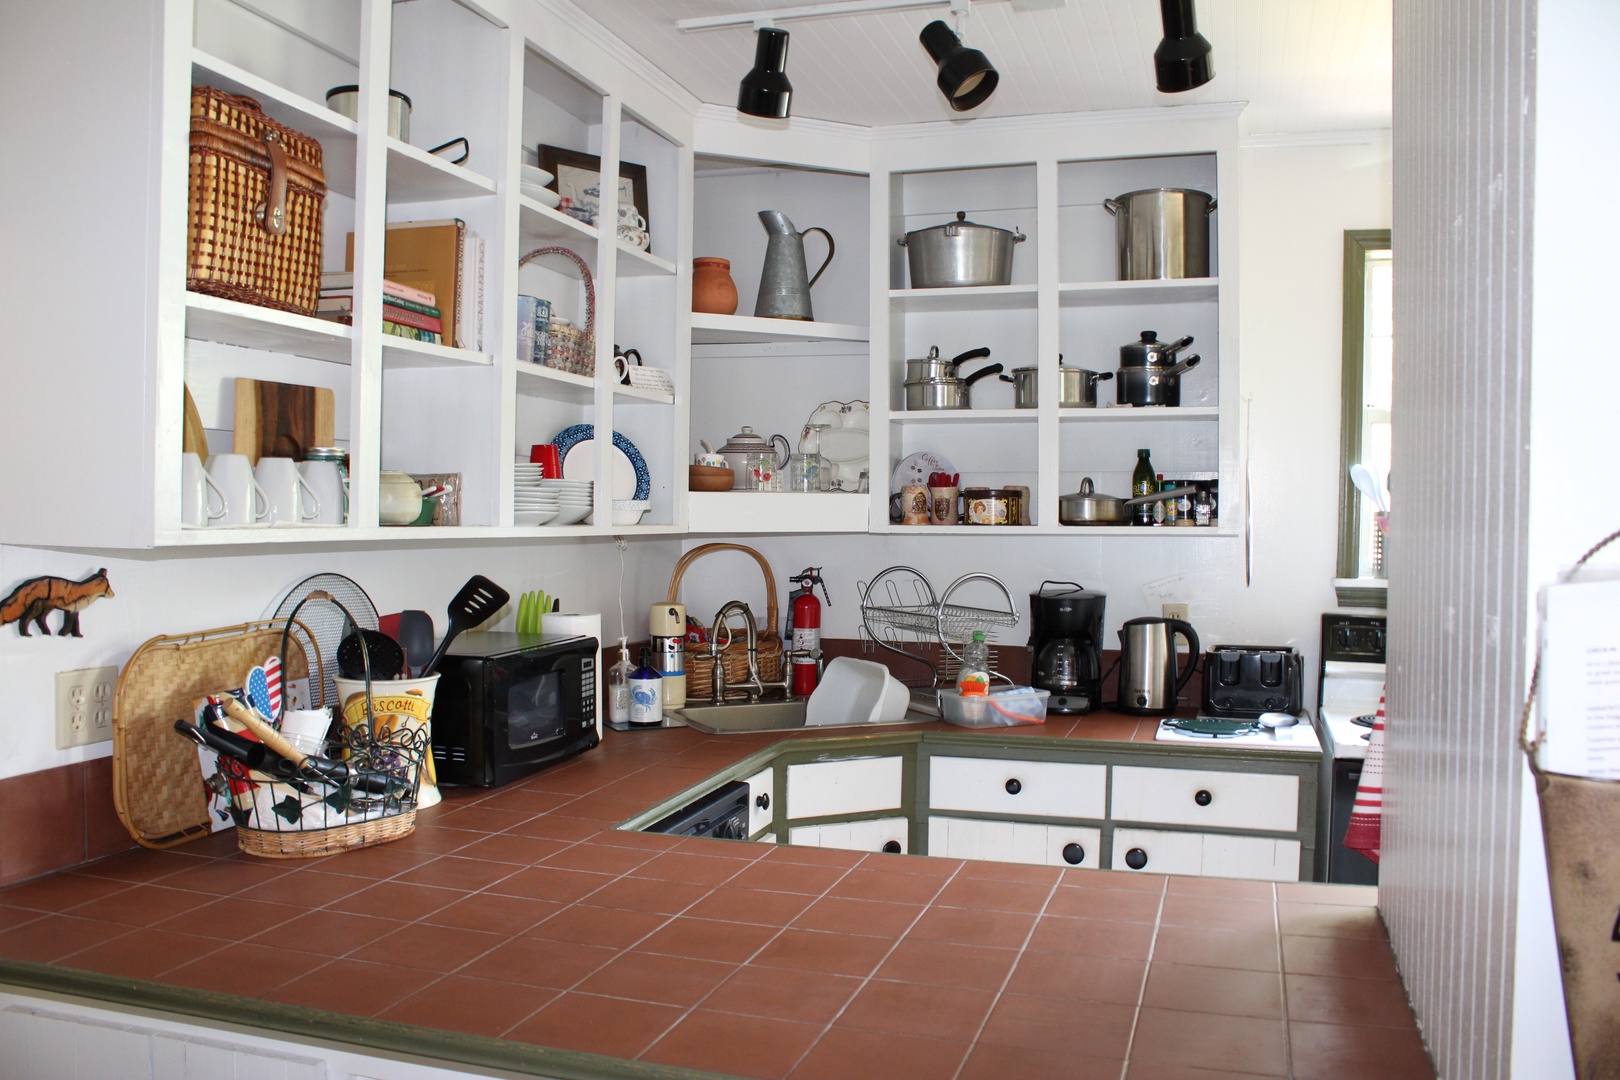 The kitchen offers lots of counter space & is well-equipped for your visit